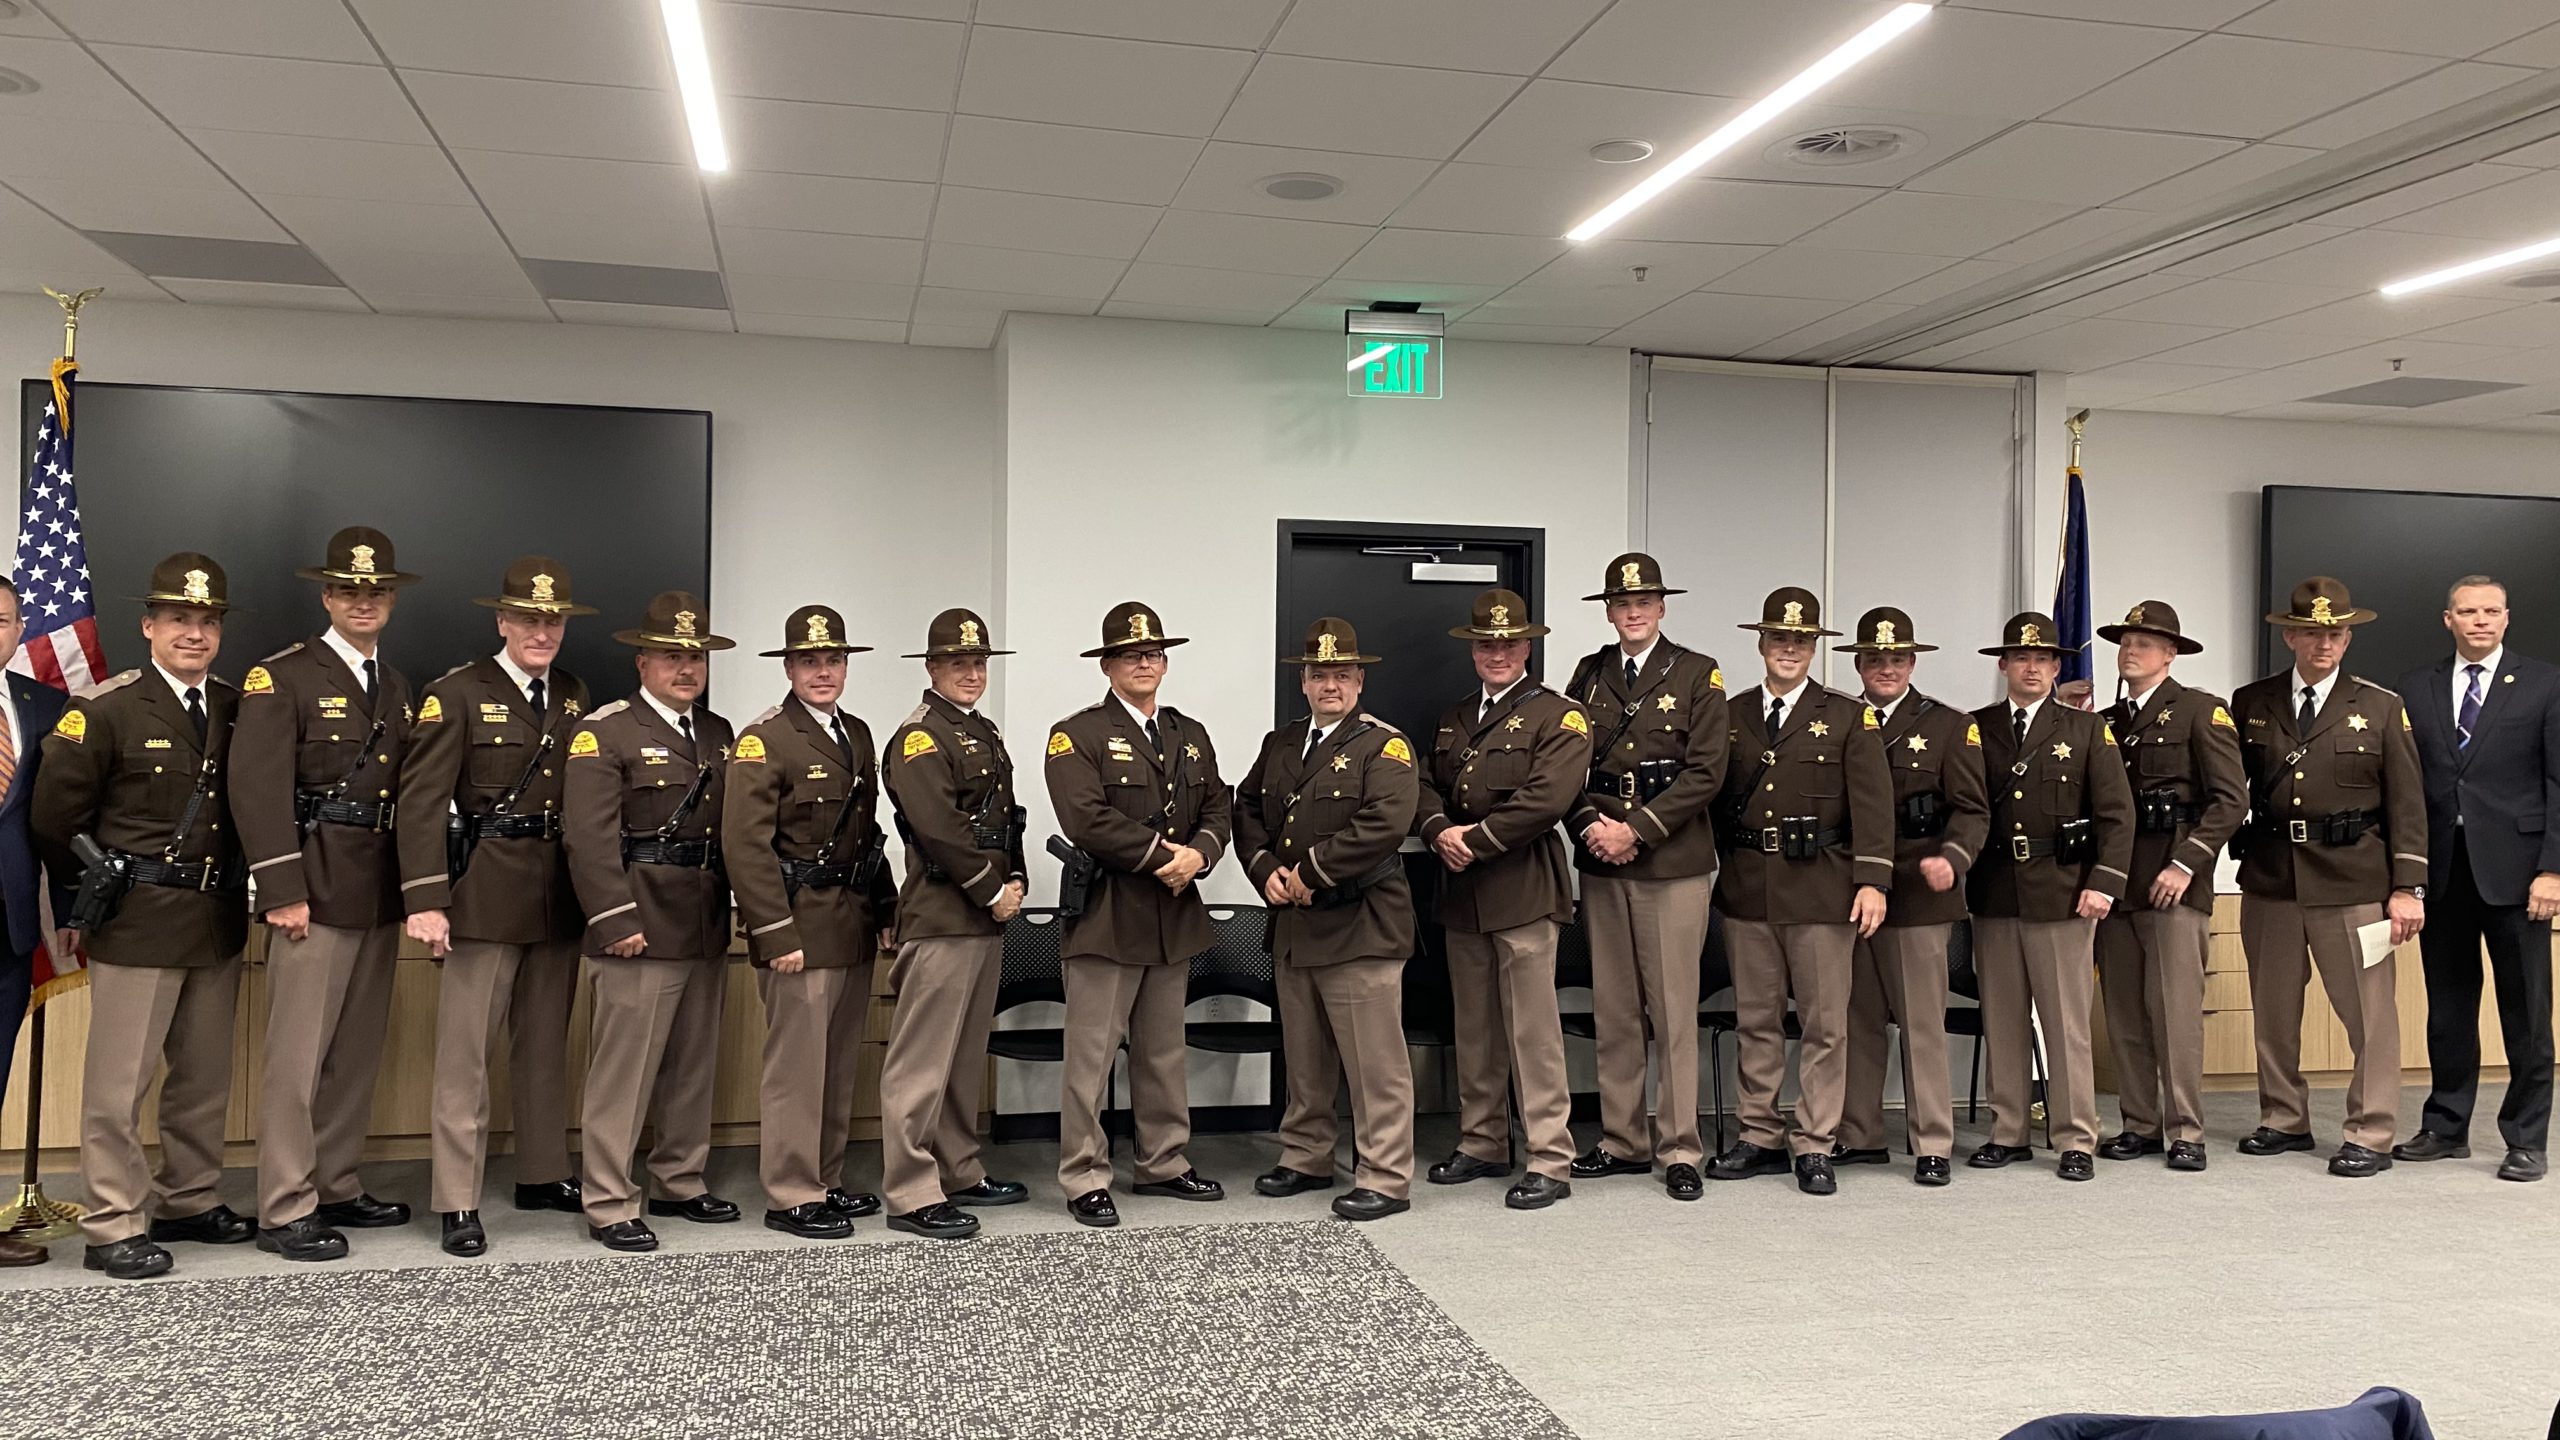 A line of UHP Troopers in uniform